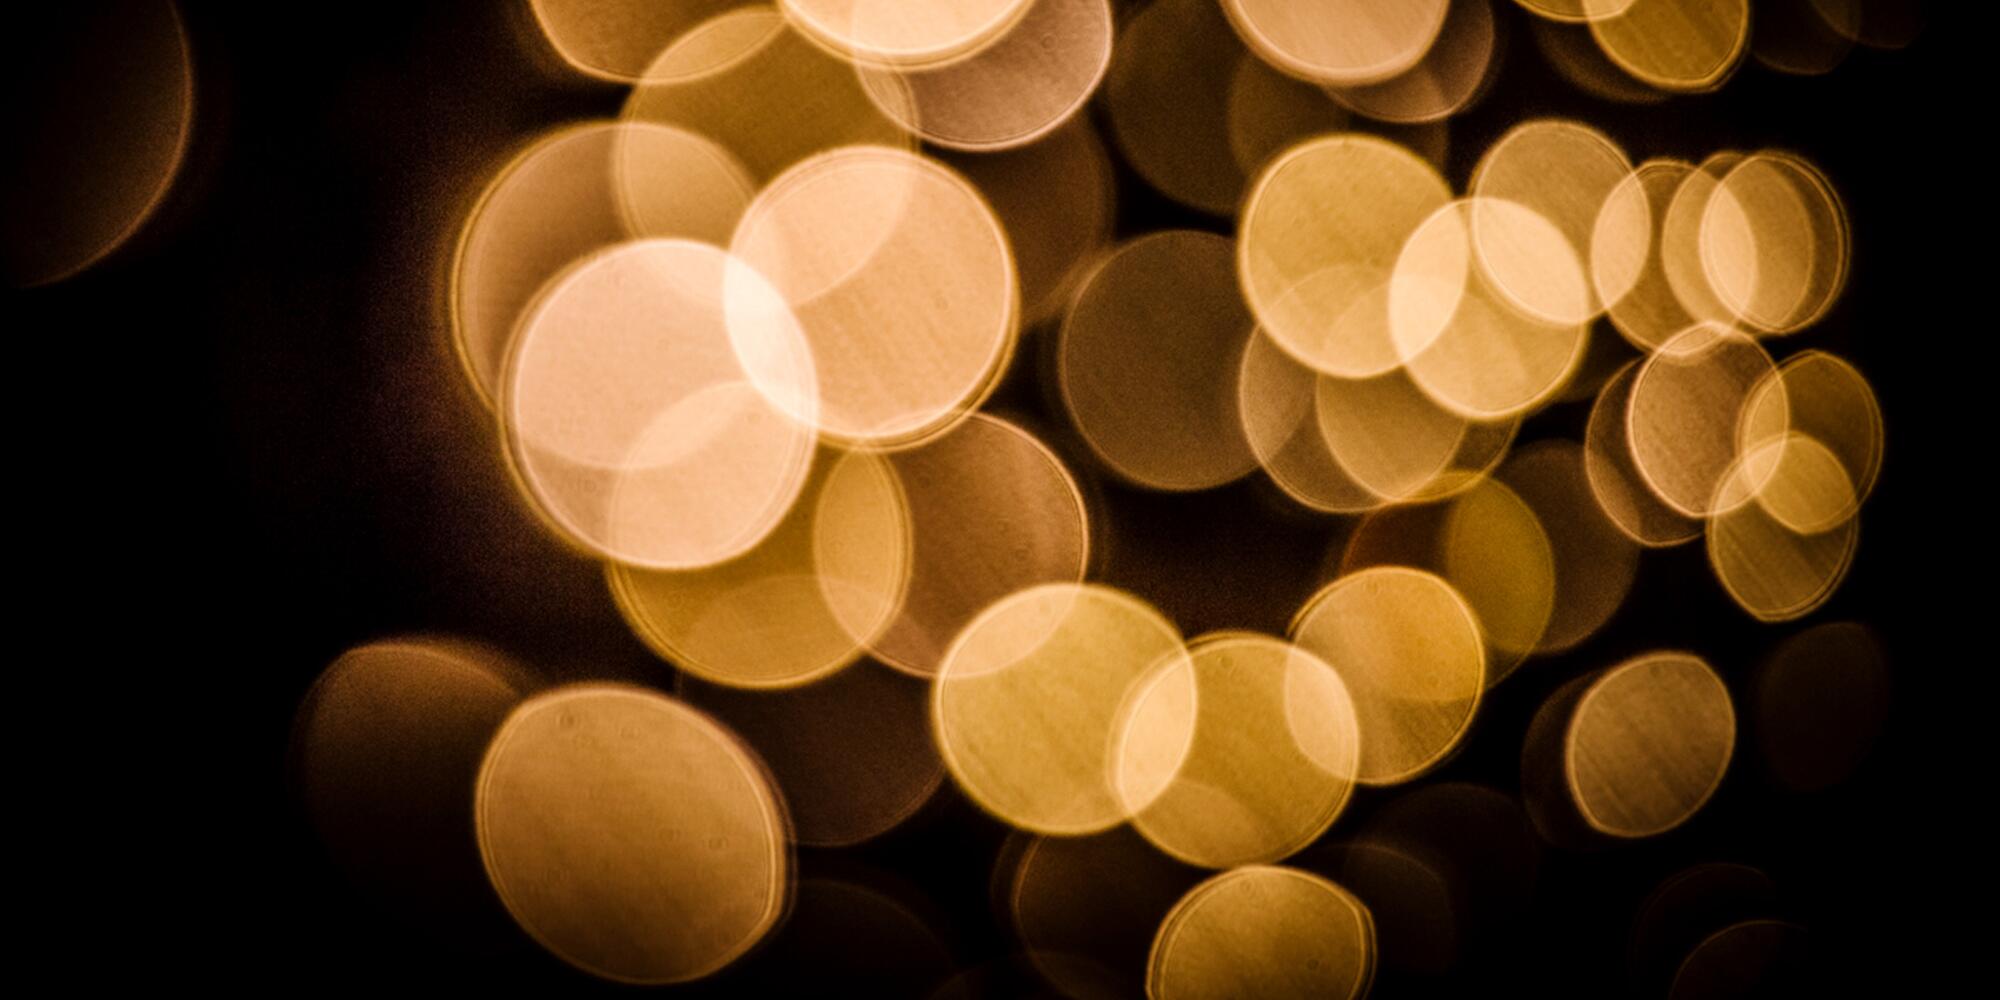 Out of focus photo of lights.